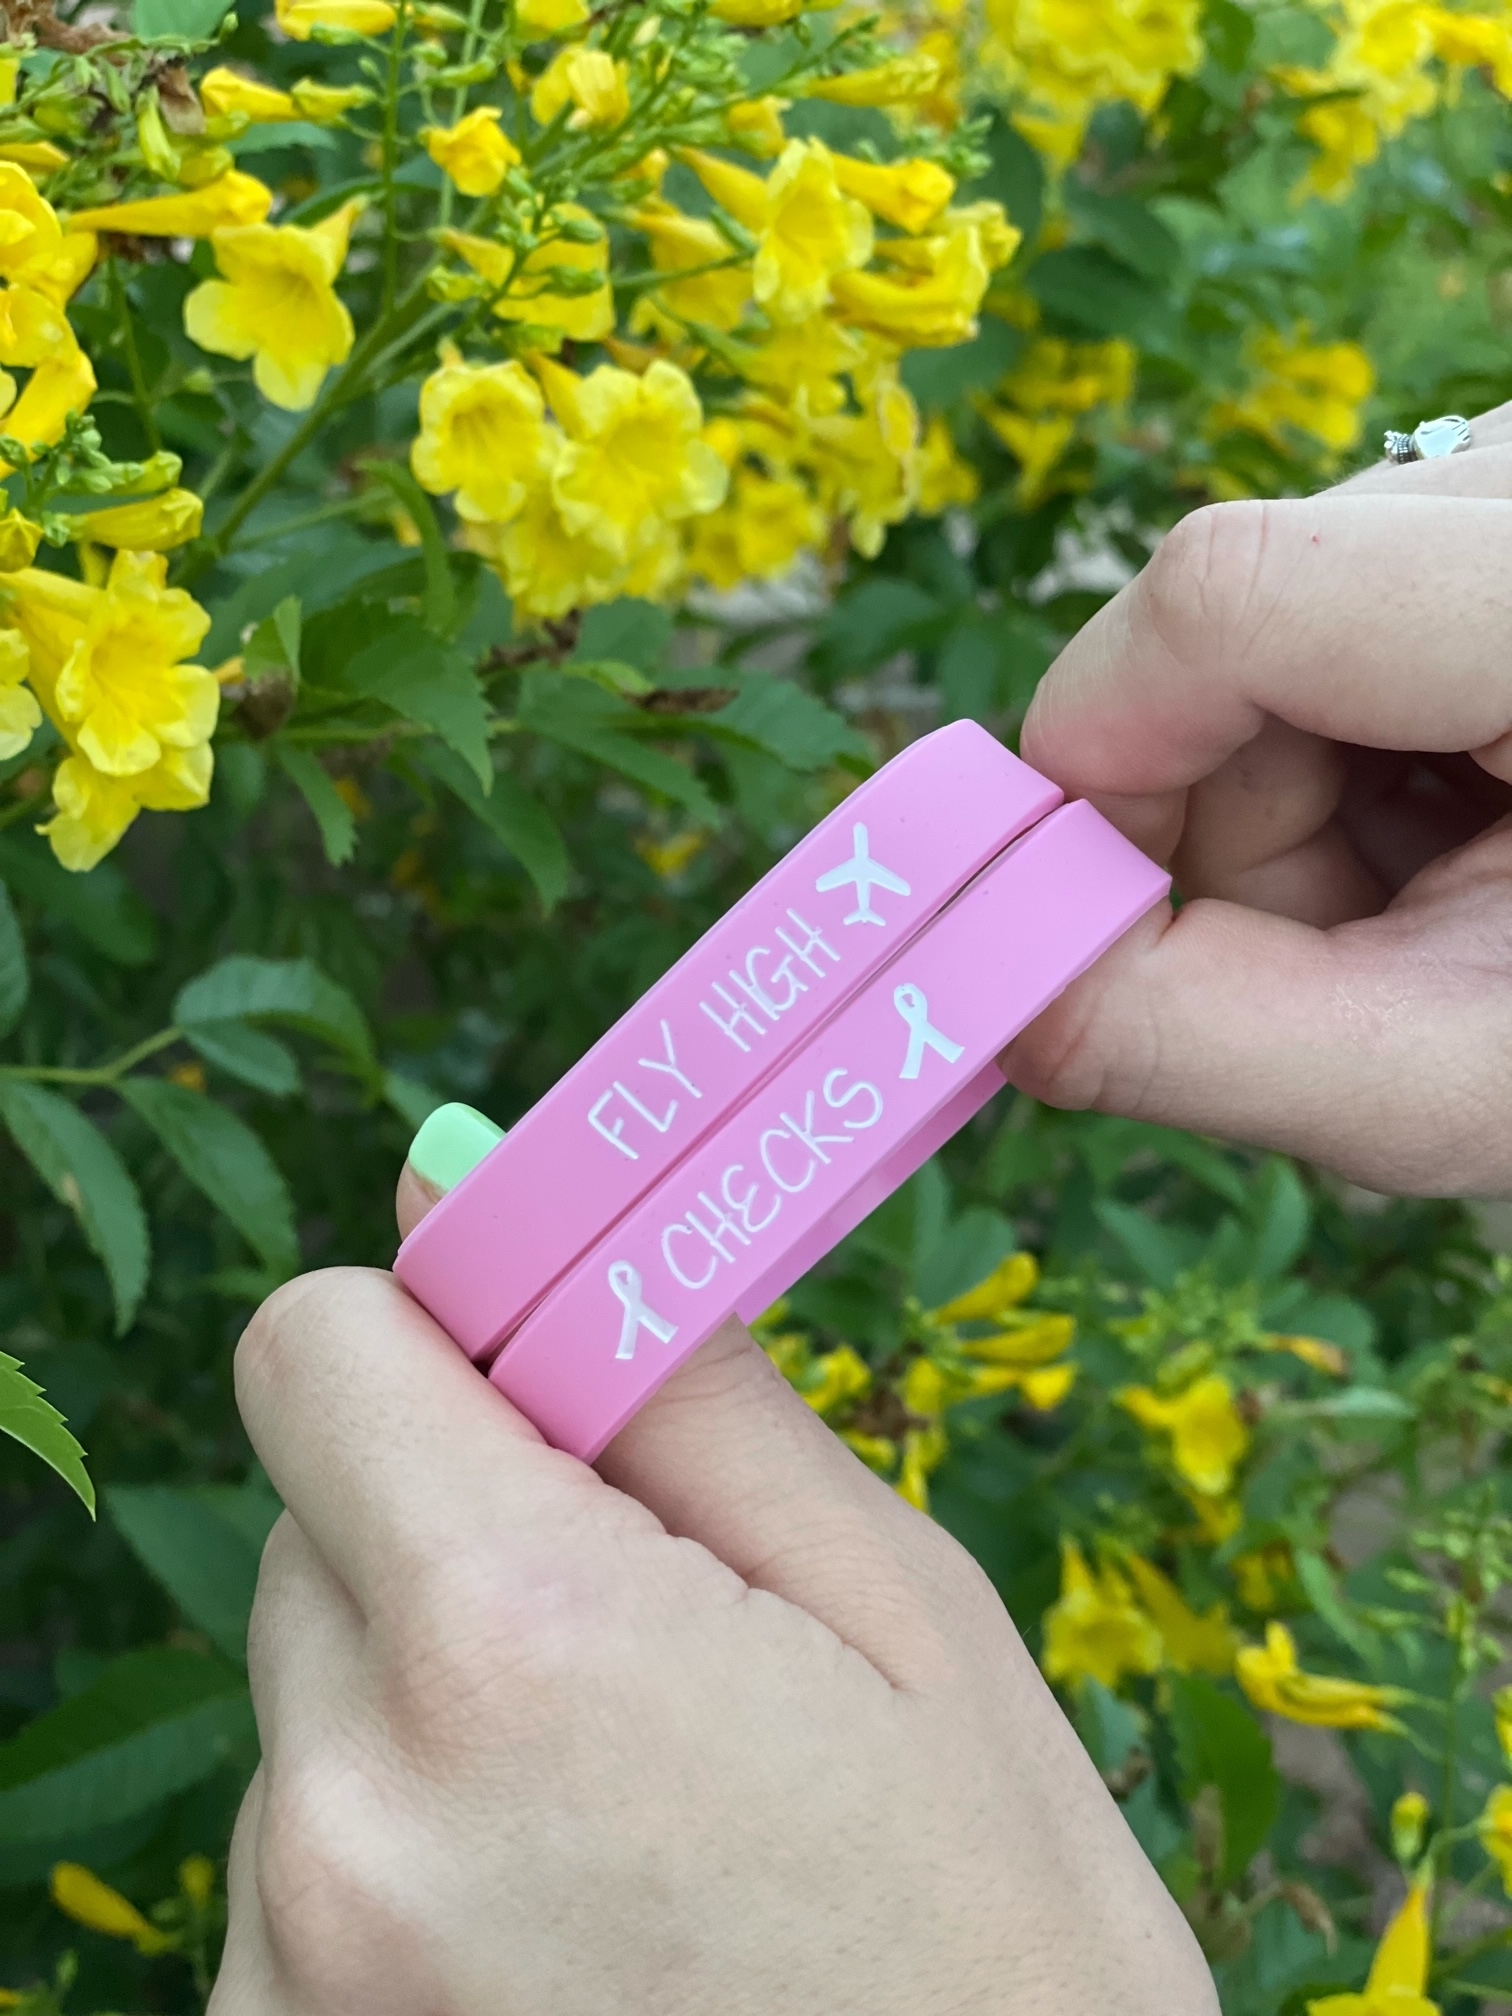 Hands hold two pink wristbands with the words Fly High and Checks on them along with breast cancer ribbon icons